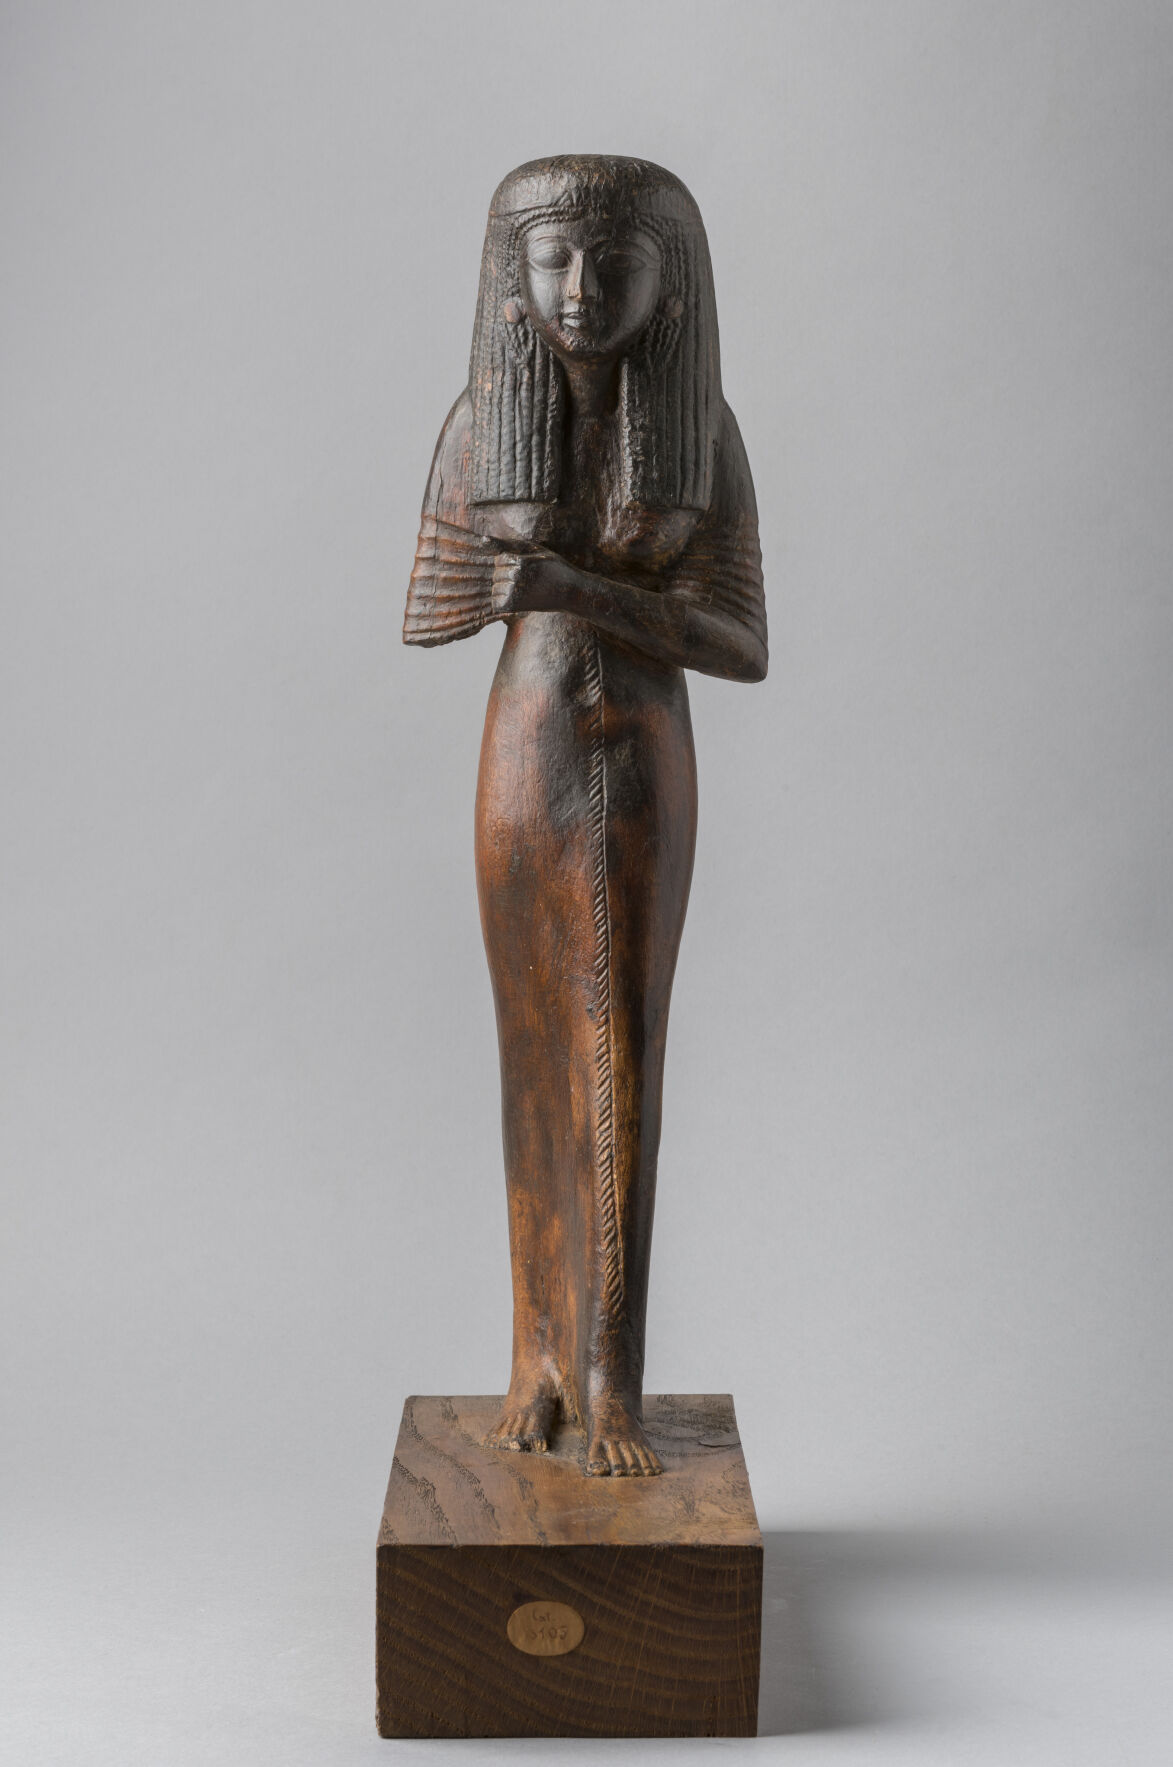 NOMA Egypt exhibit in March includes this 3,000-year-old statuette 